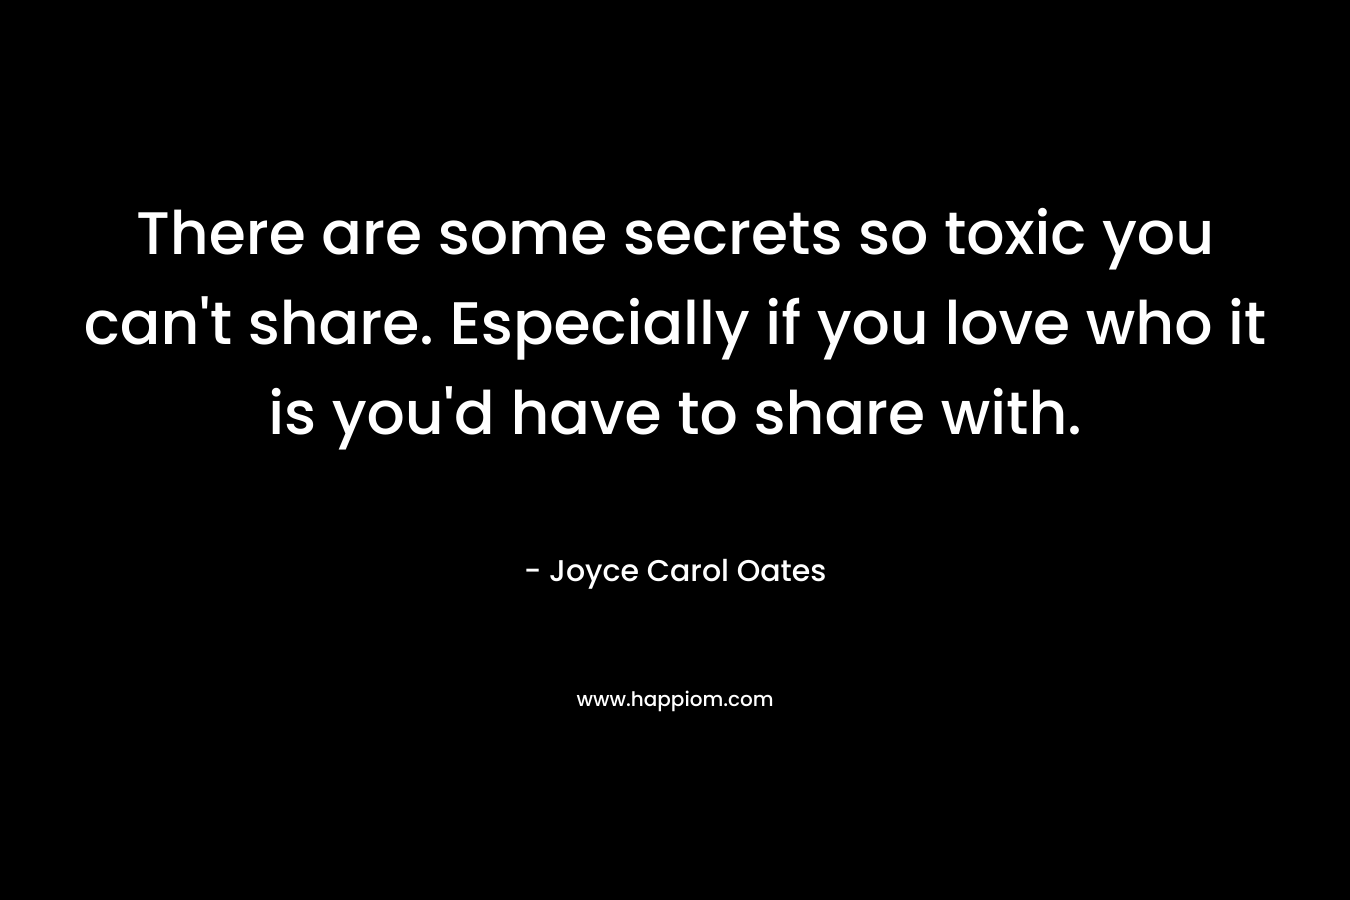 There are some secrets so toxic you can’t share. Especially if you love who it is you’d have to share with. – Joyce Carol Oates